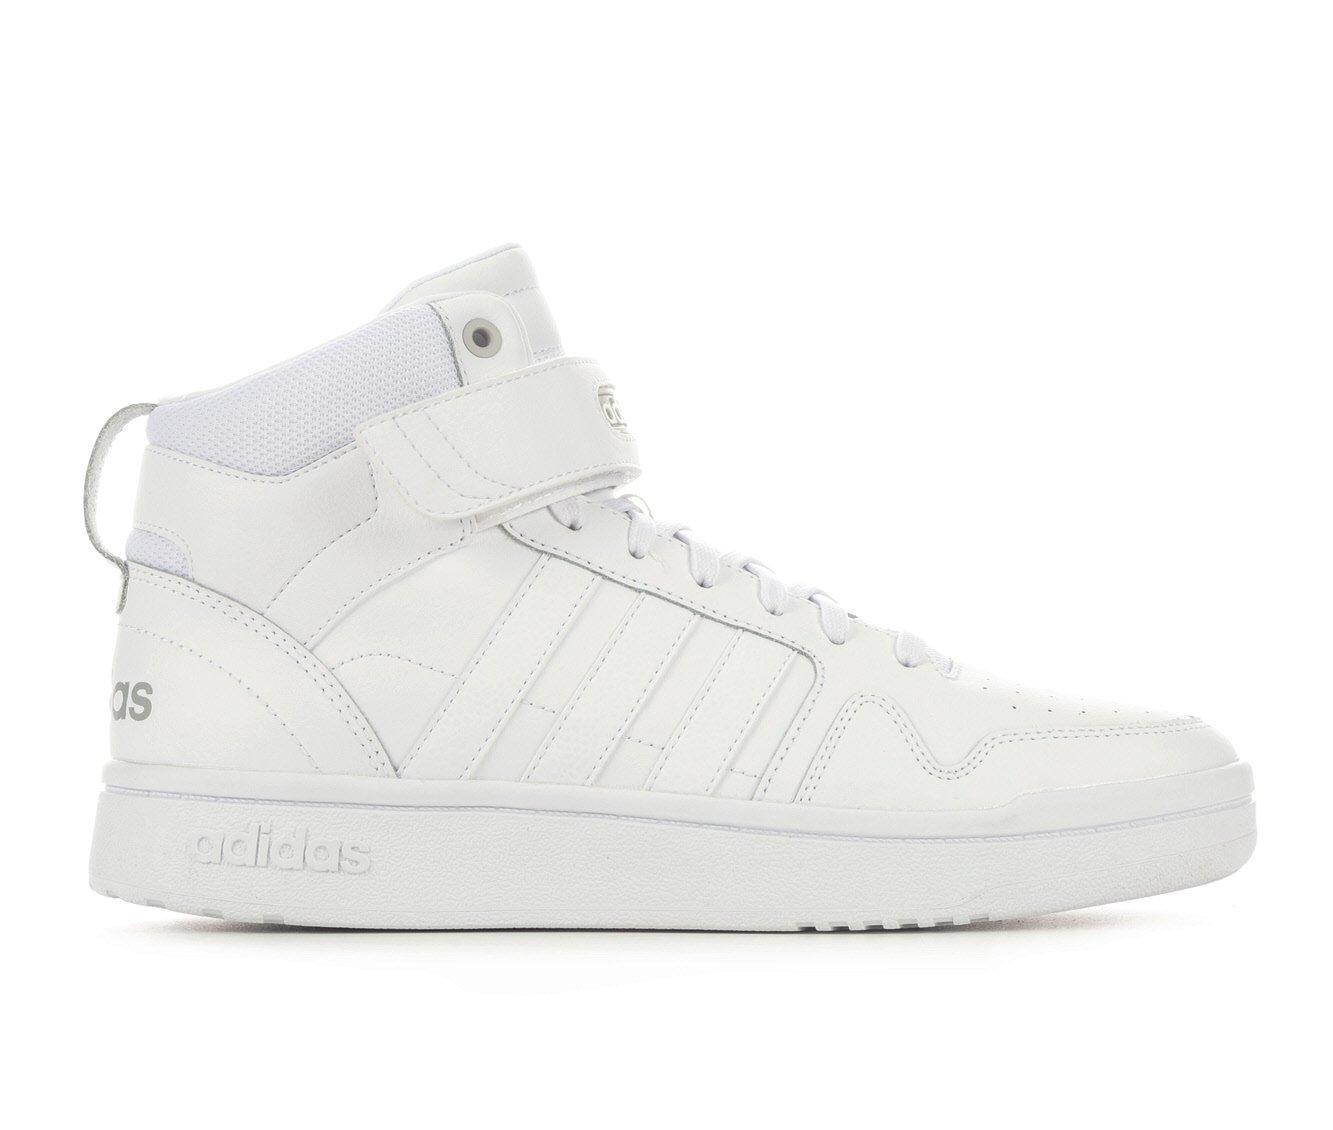 Men's Adidas Post Move Mid Sneakers | Shoe Carnival